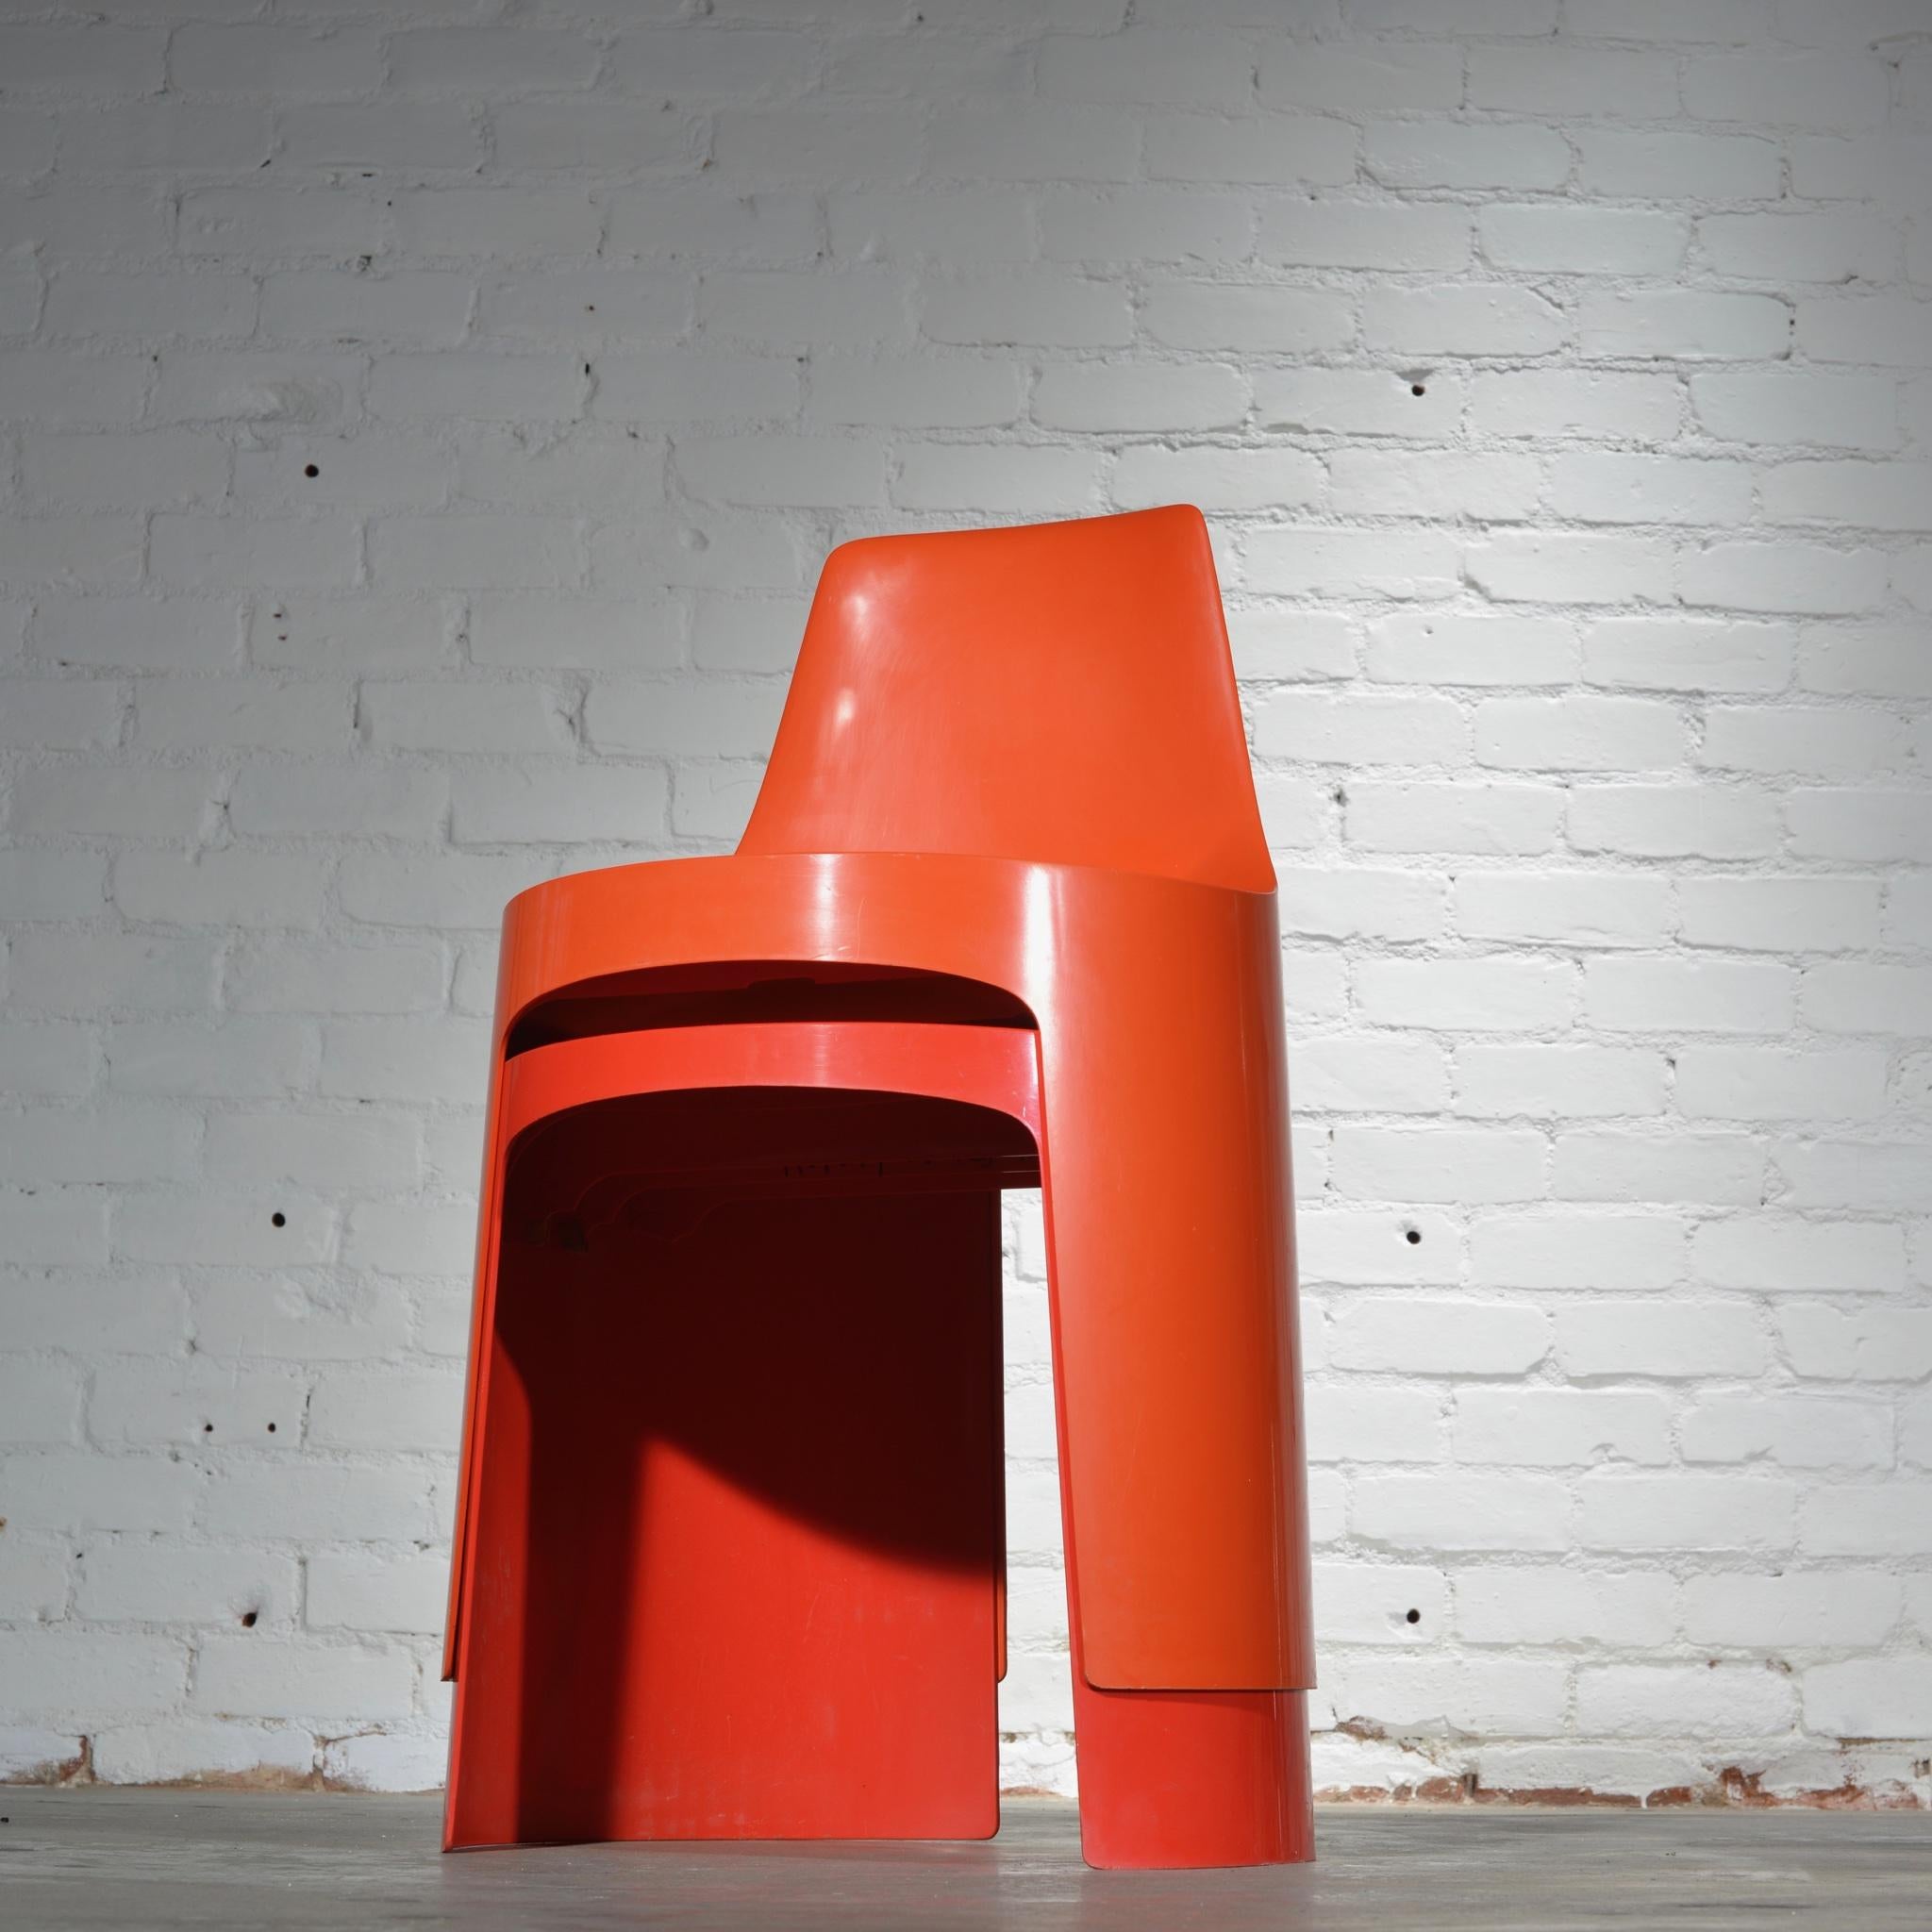 plastic stackable chairs